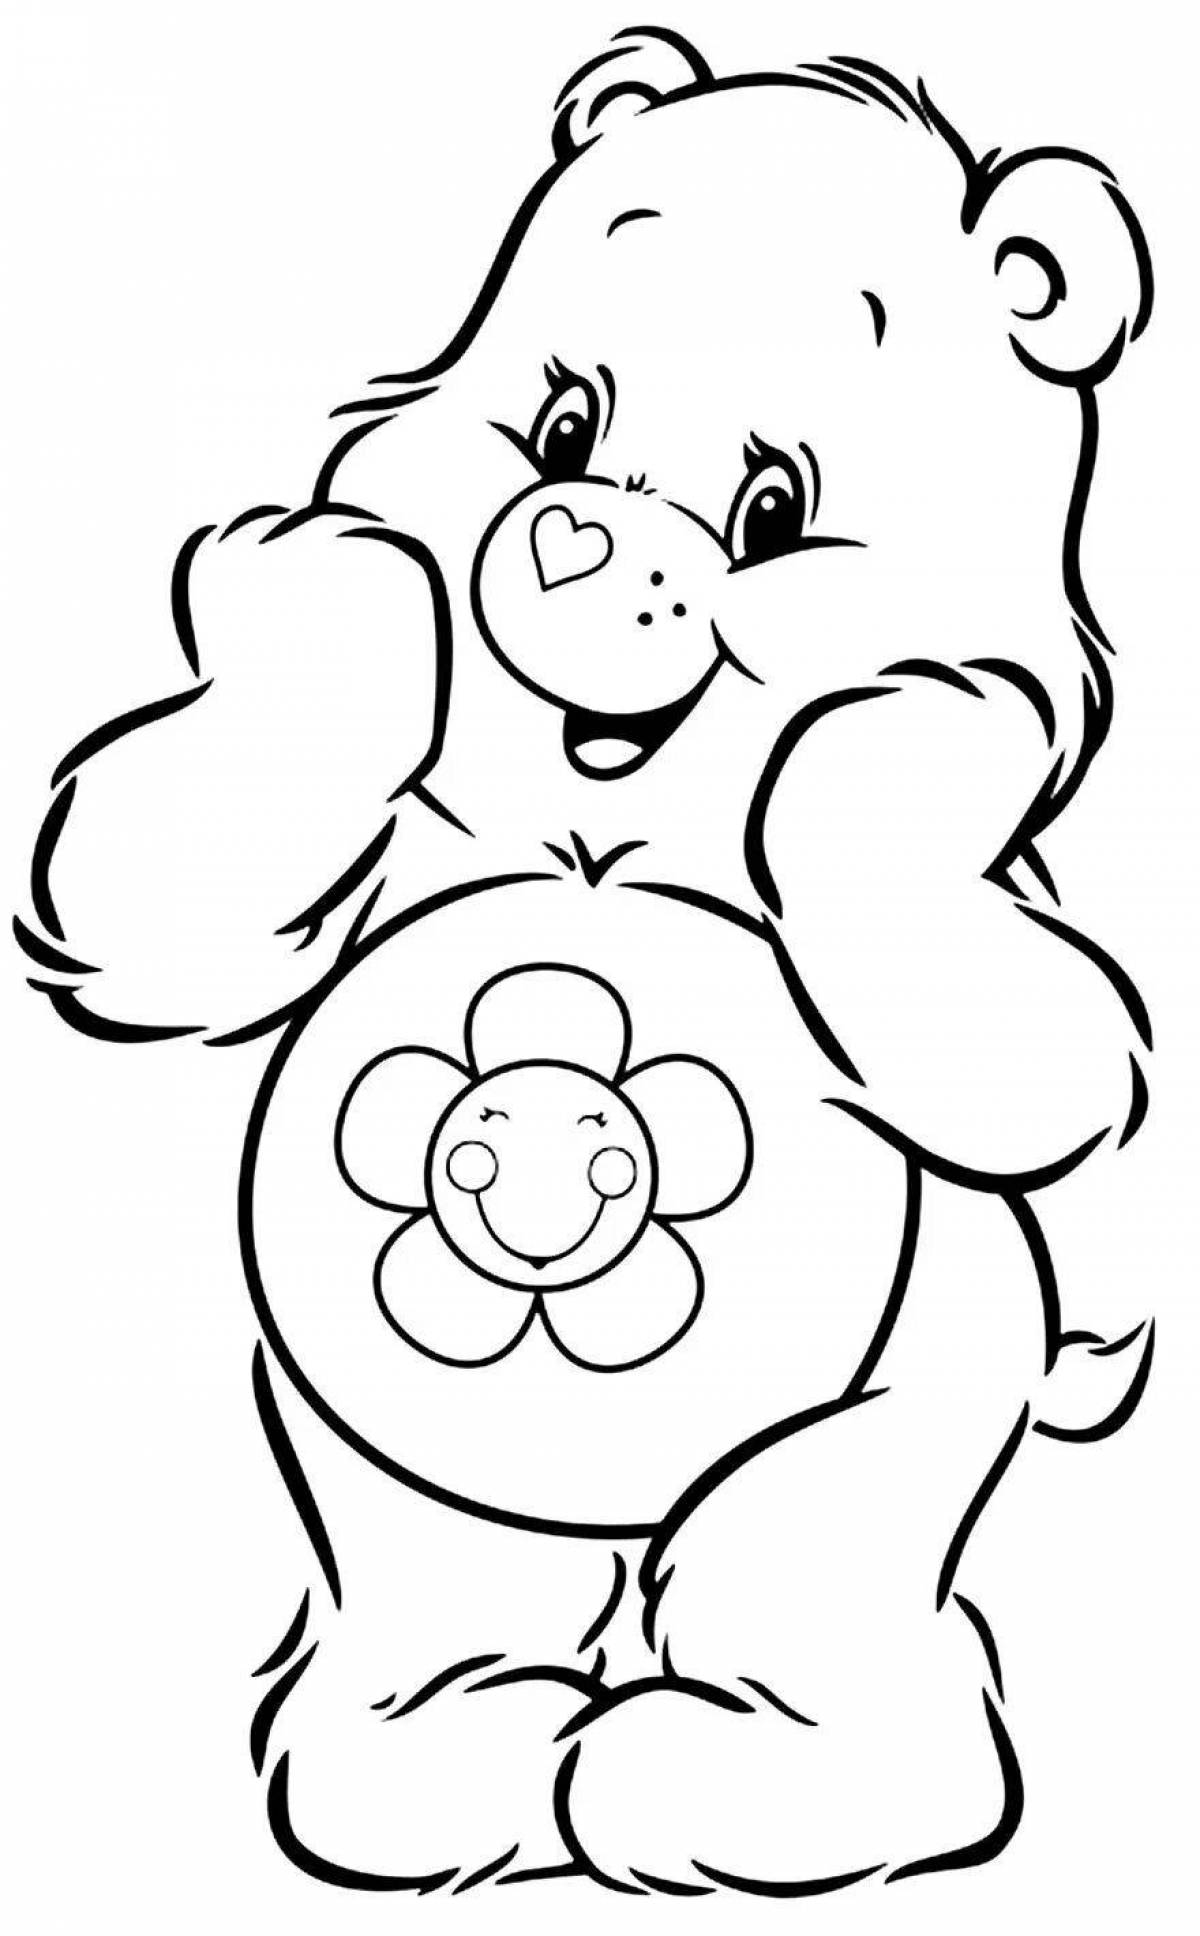 Cute care bears coloring page